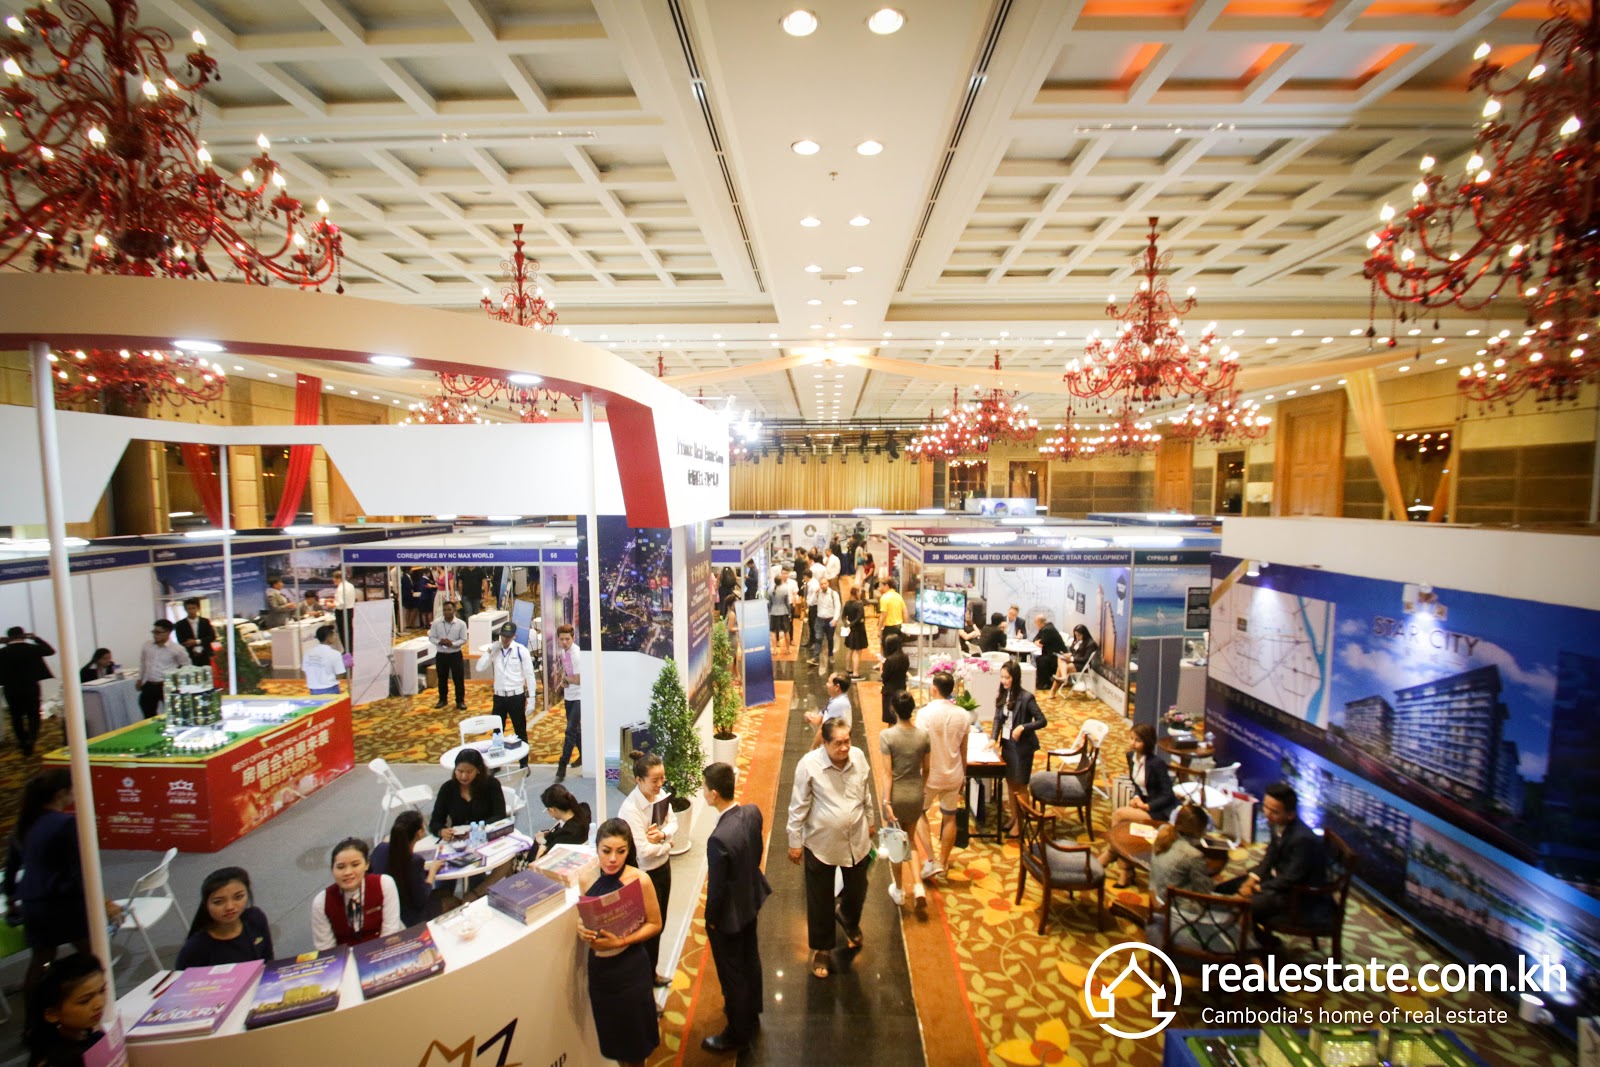 The Realestate.com.kh Expo, Cambodia’s #1 Property Show Returns this 19-20, October